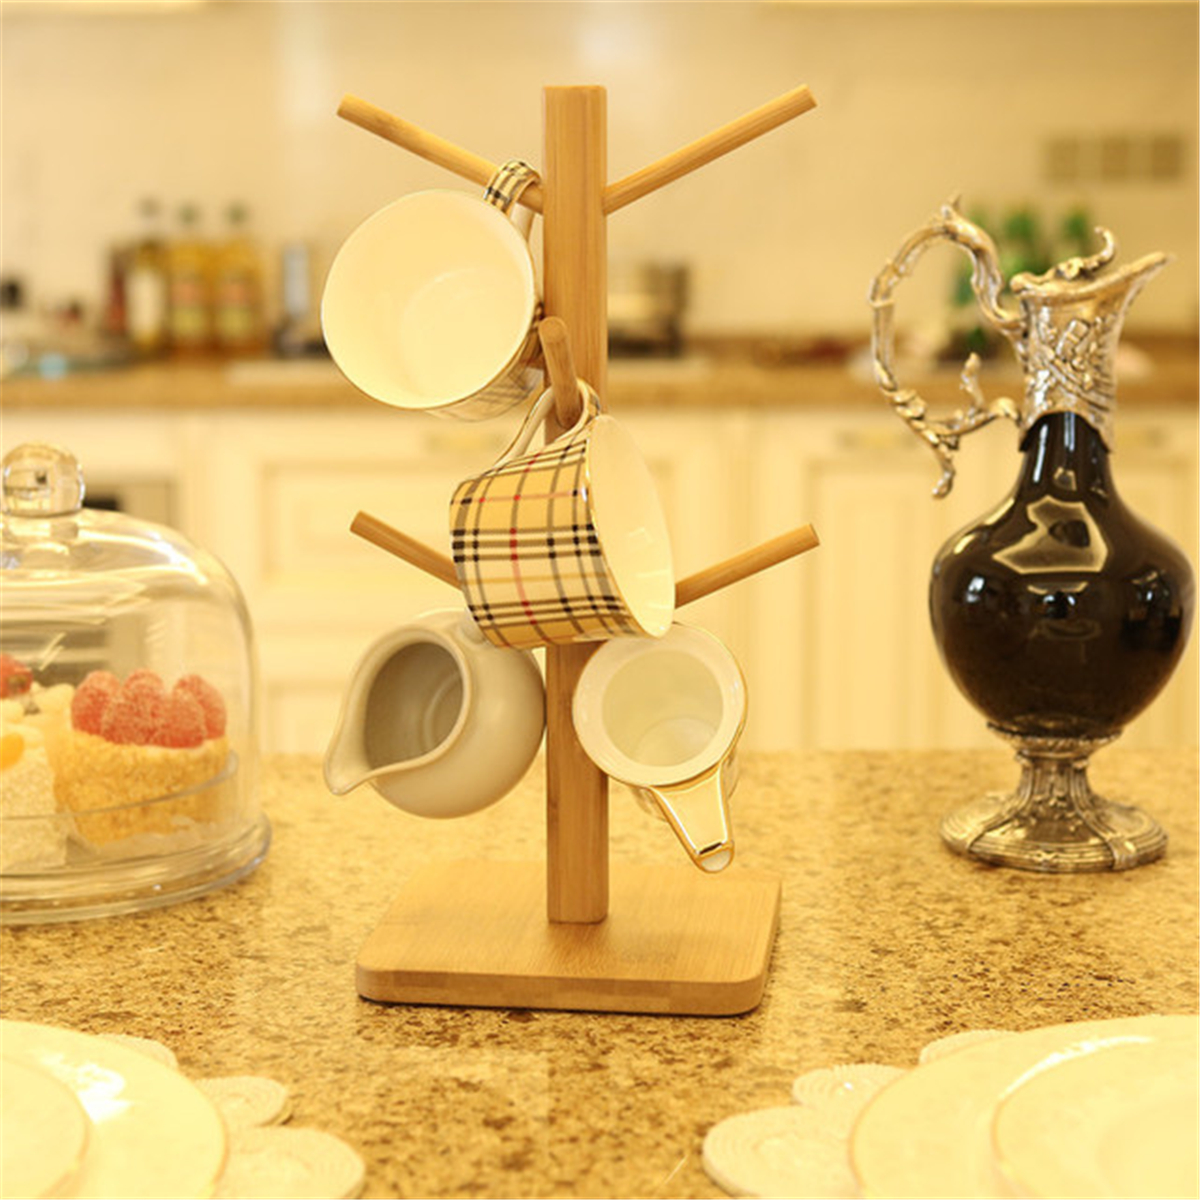 Wooden-Cup-Holder-Teacup-Mug-Drain-Rack-Stand-6-Cups-Drain-Cup-Hanging-Stand-Coffee-Cup-Display-Stan-1777089-4